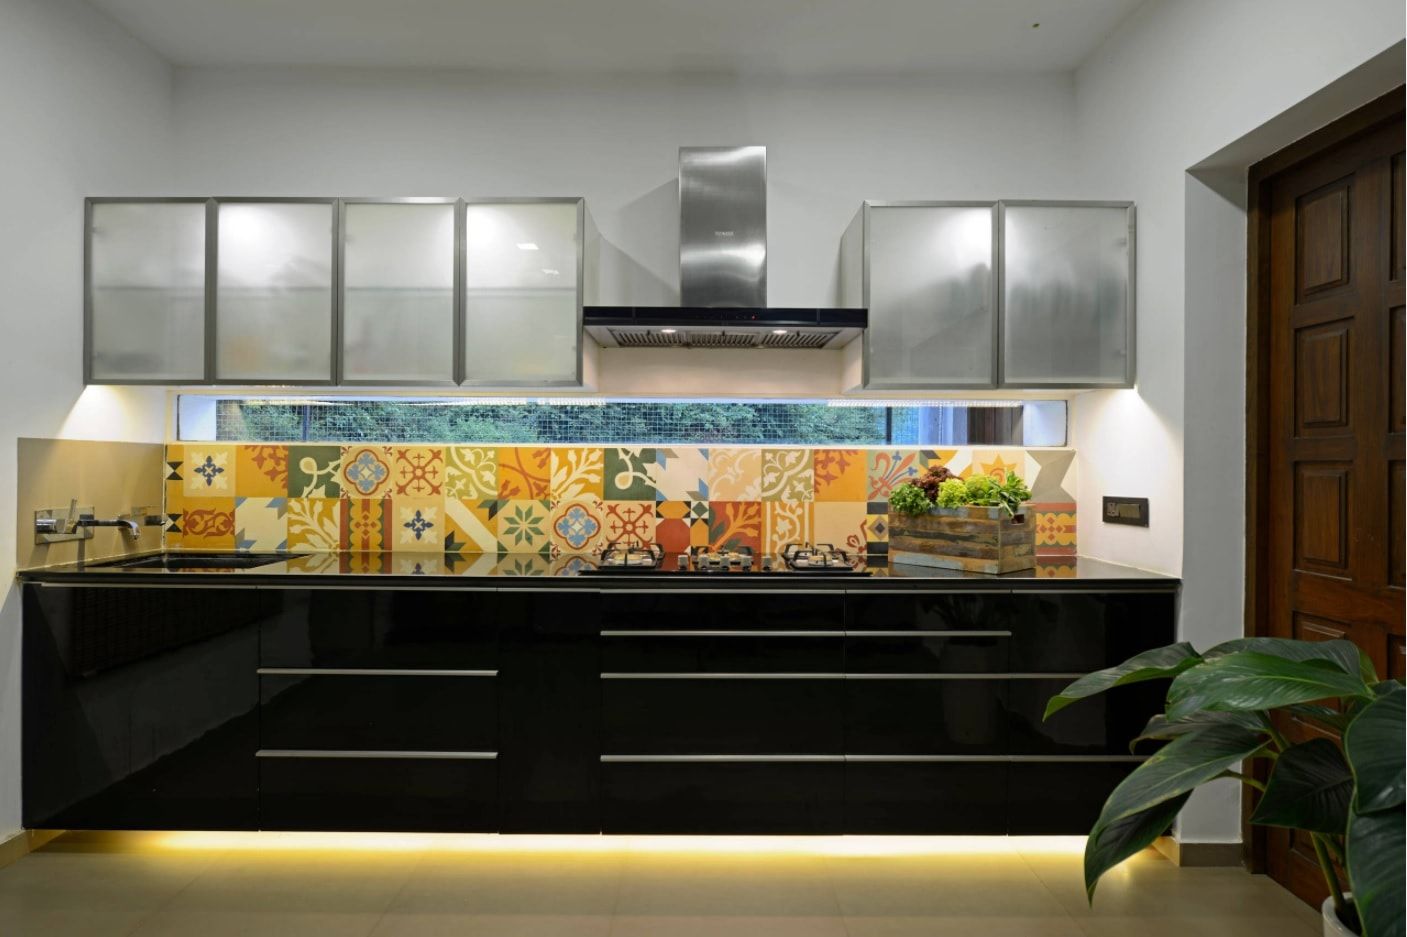 Modern kitchen with dark low tier and LED lighting of the floor, painted Moroccan tiled splashback and silver coated high tier of the furniture set